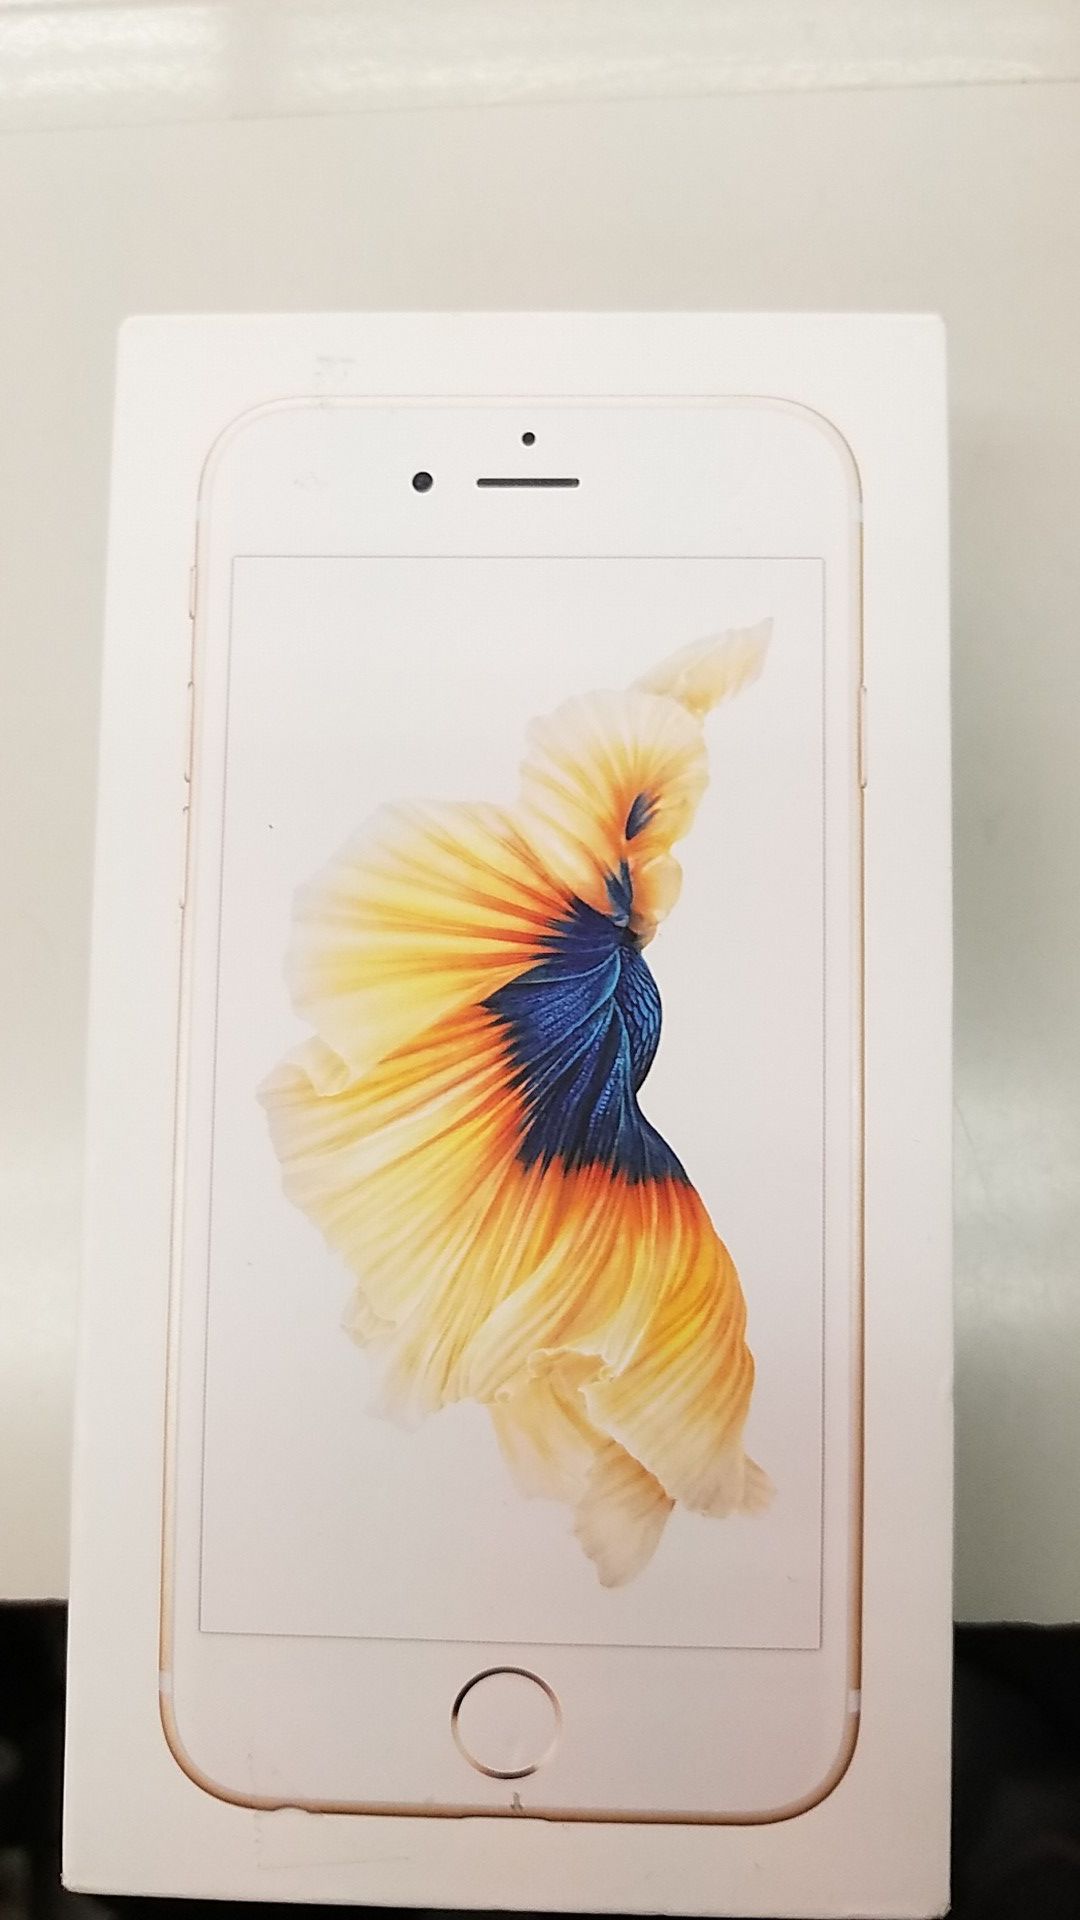 Apple iPhone 6s unlocked silver 32gb in the box